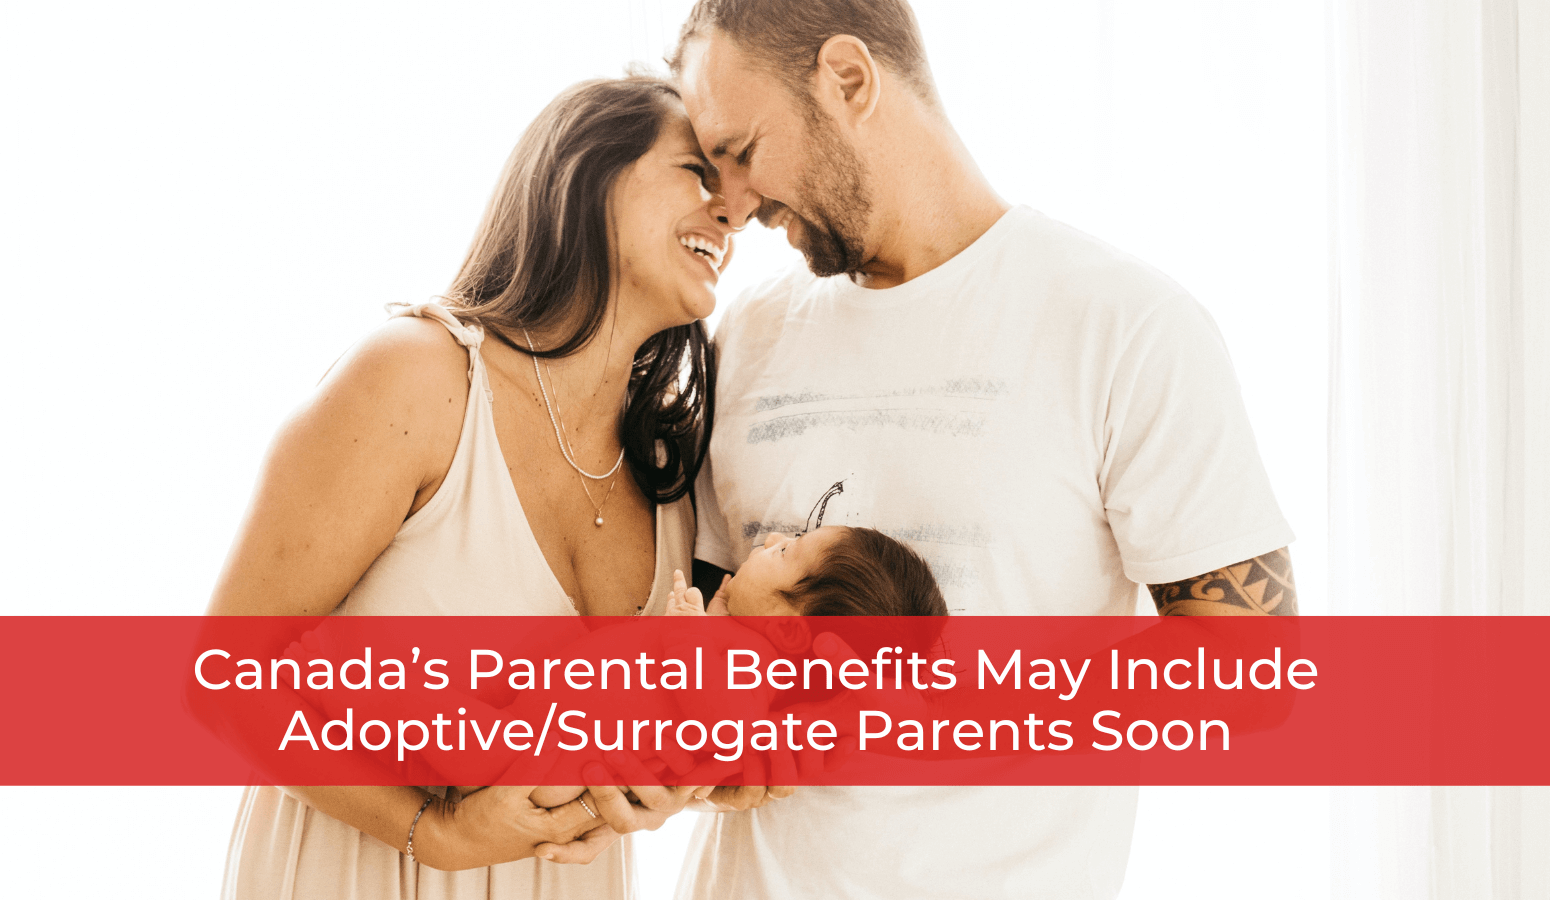 Featured image for “Canada’s Parental Benefits May Cover Adoptive/Surrogate Parents”